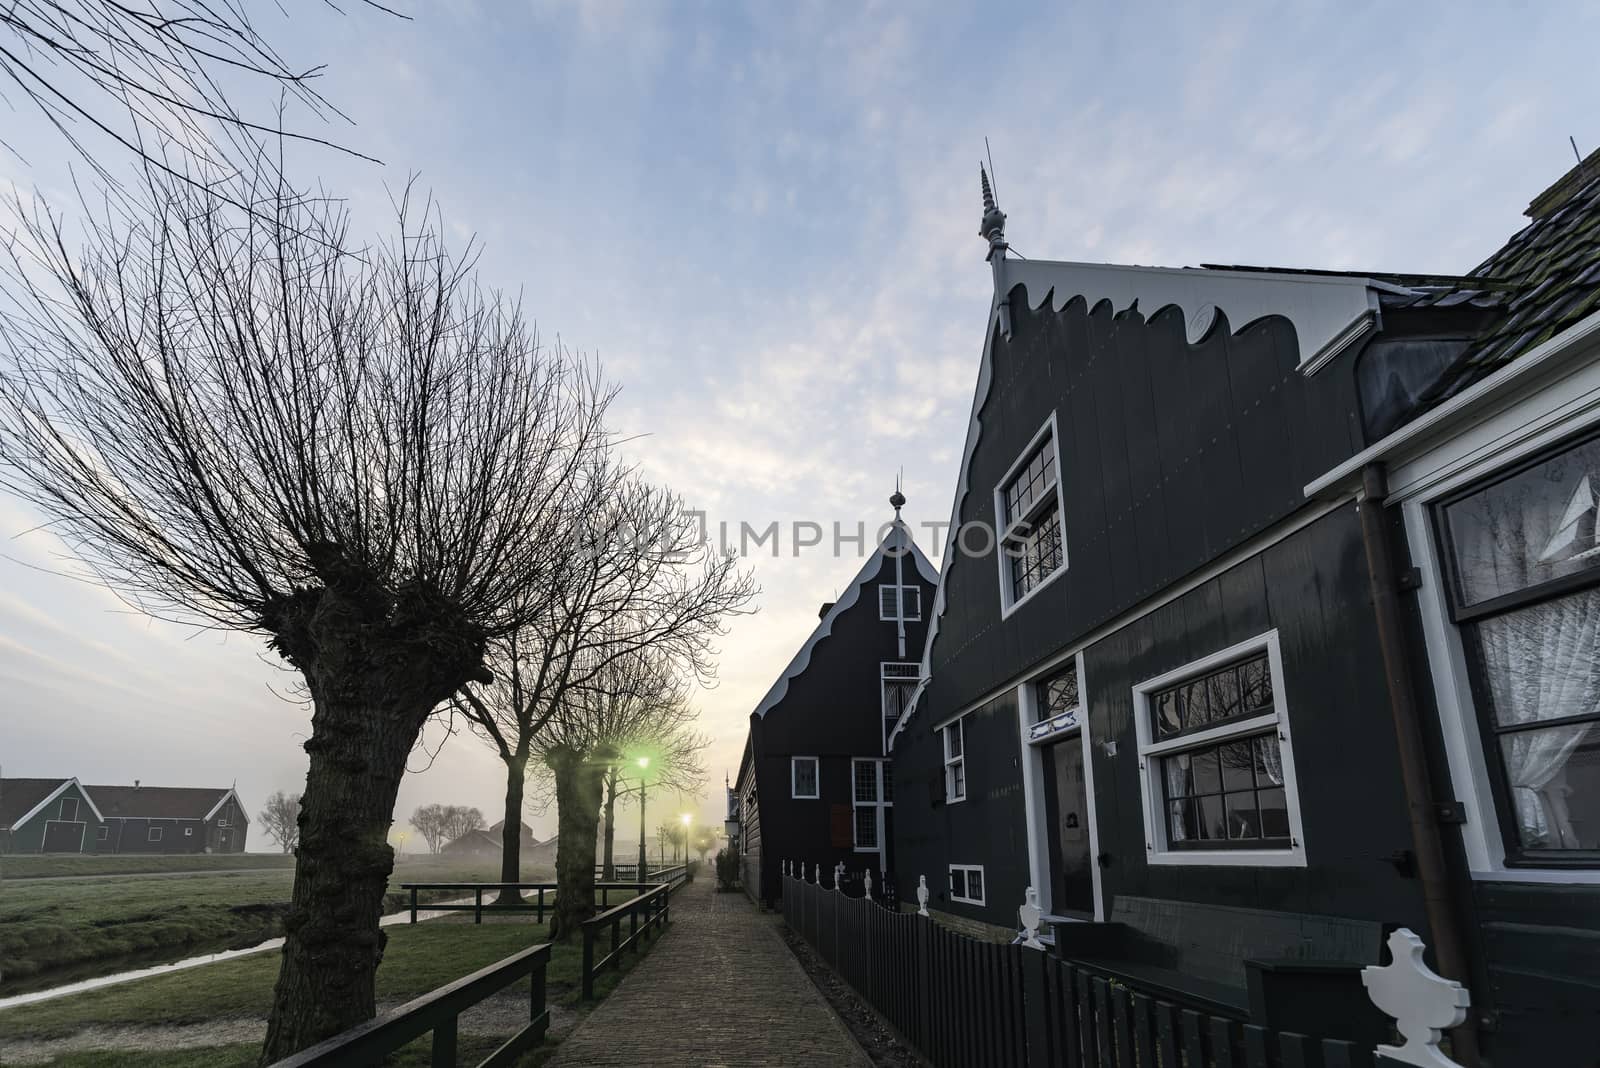 Hanging lamppost Beautiful typical Dutch wooden houses architecture at the sunrise moment mirrored on the calm canal of Zaanse Schans located in the North of Amsterdam, Netherlands